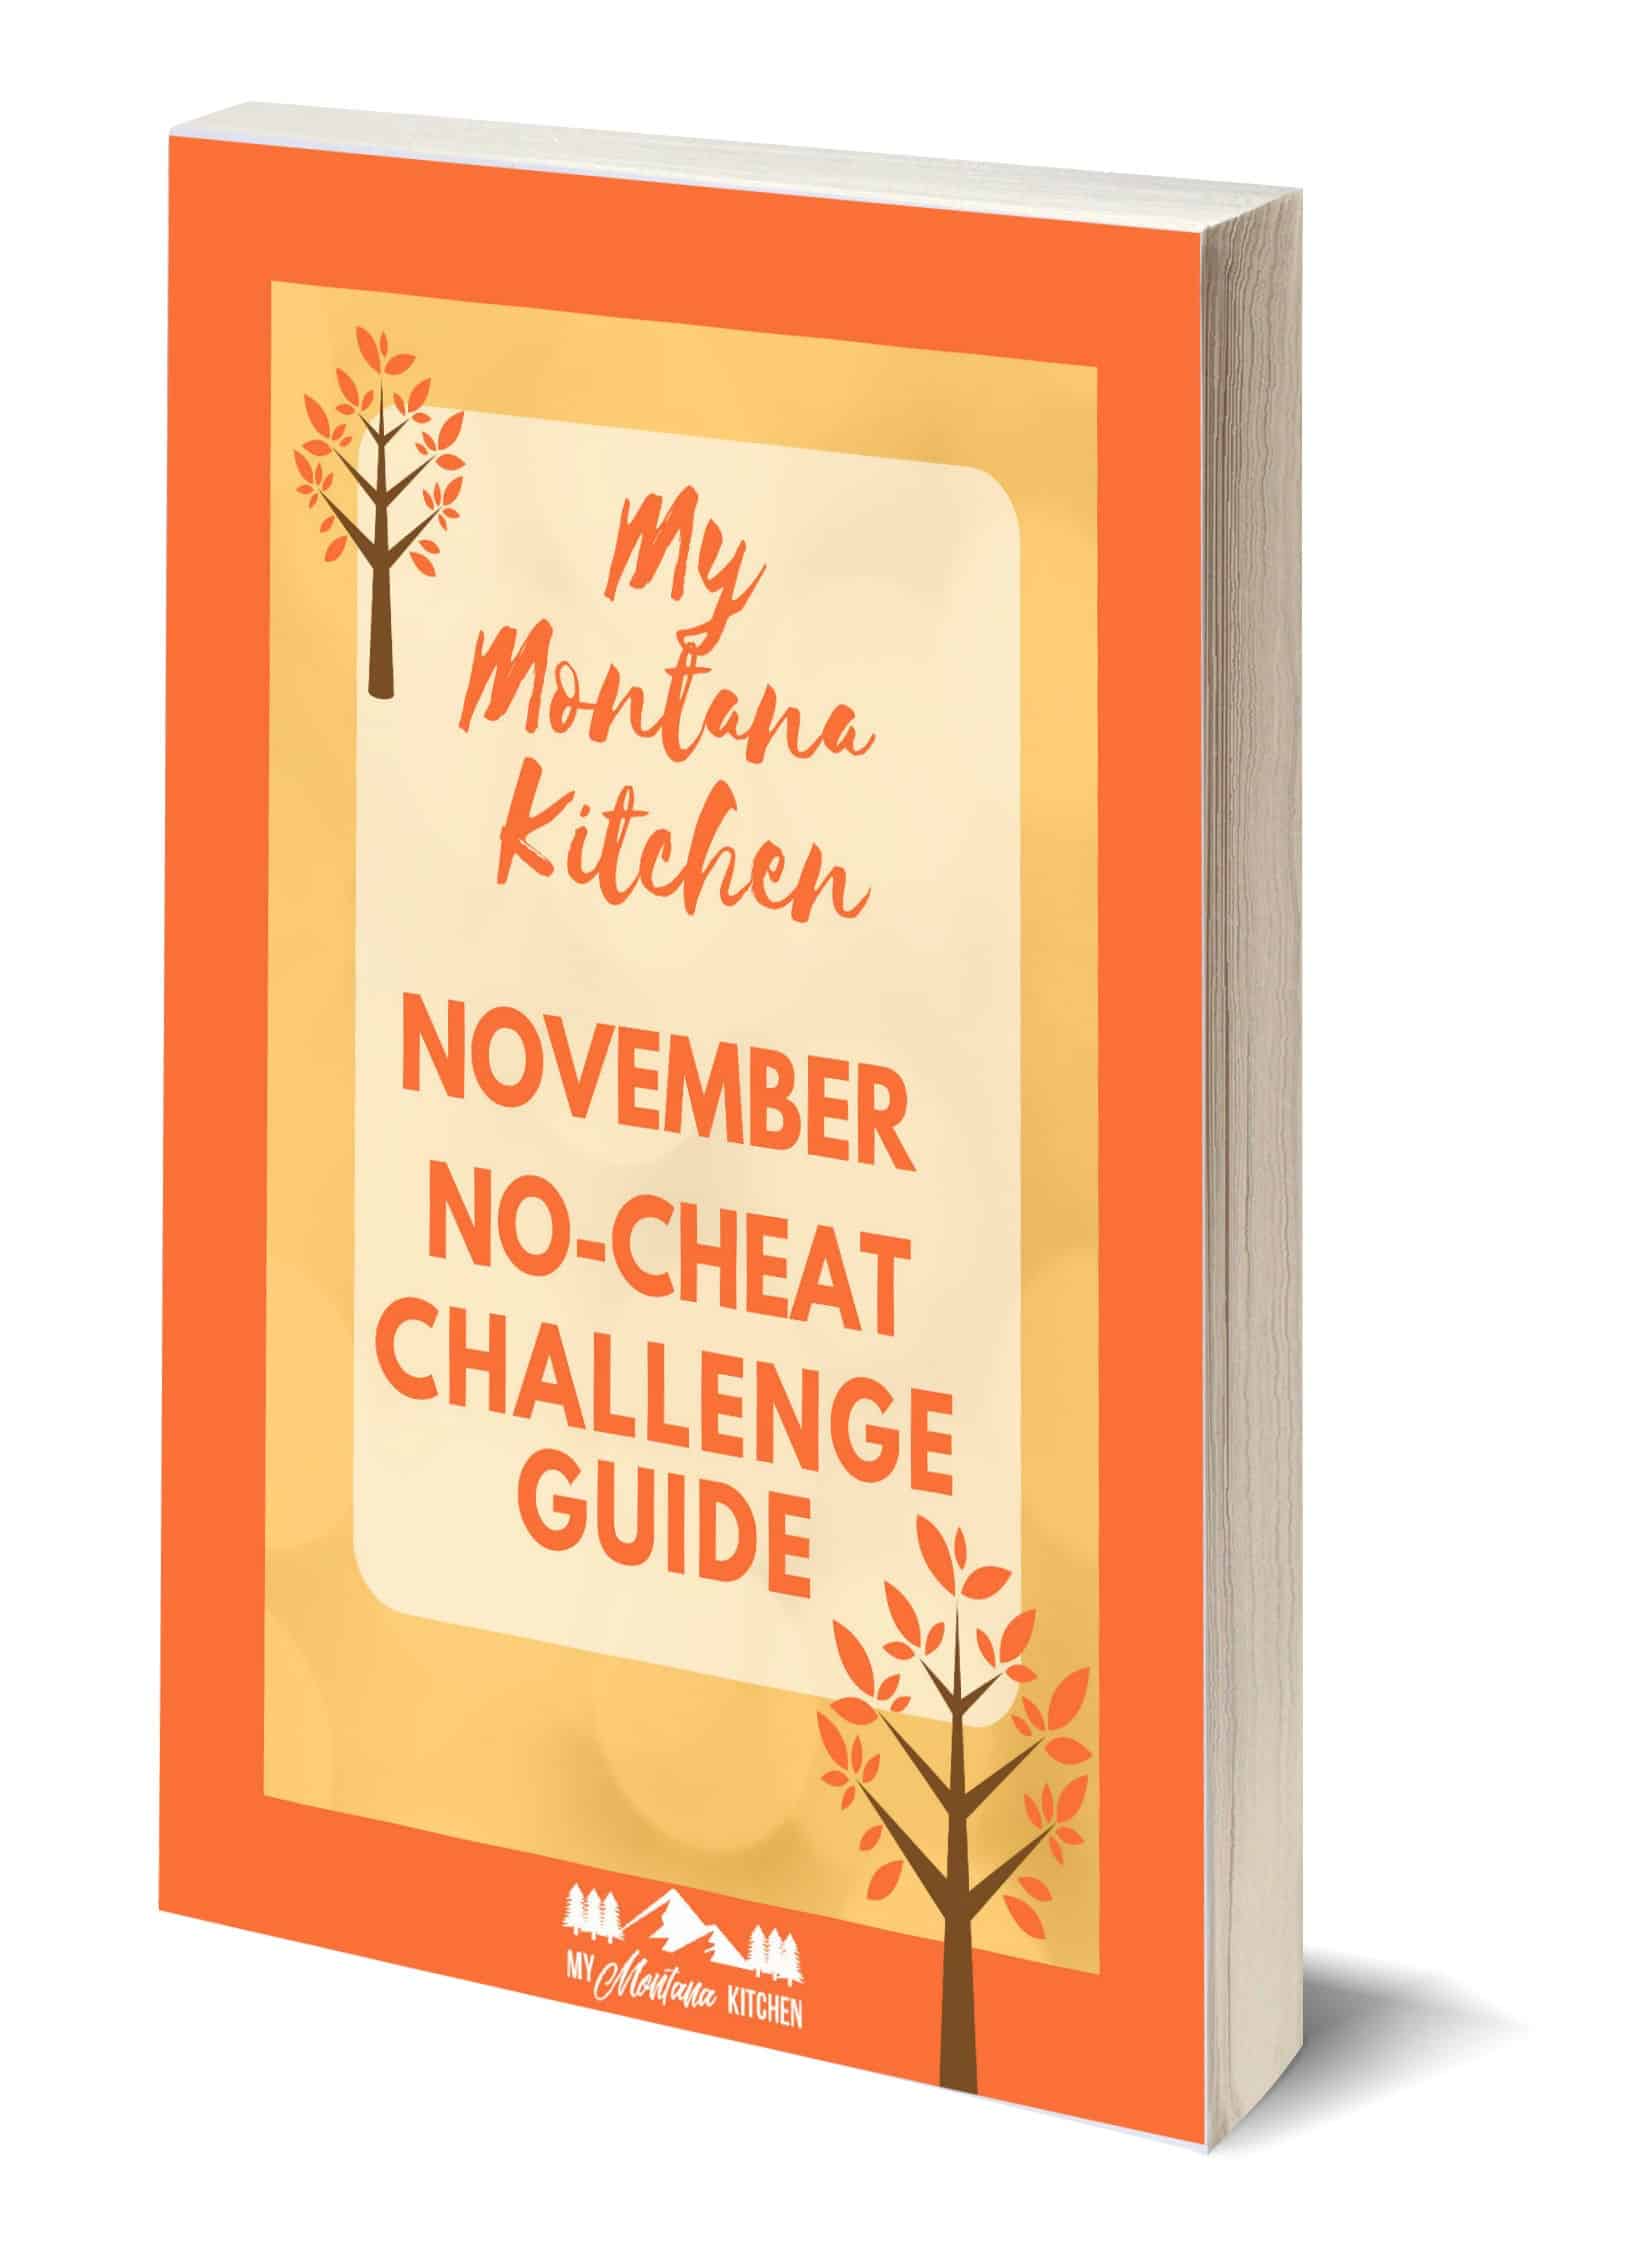 Are you struggling to stay on plan? Wish someone would do all the work for you? Join My Montana Kitchen for a 2 Week No-Cheat Challenge! Menus, shopping lists, tips, and more! #trimhealthymama #thm #challenge 